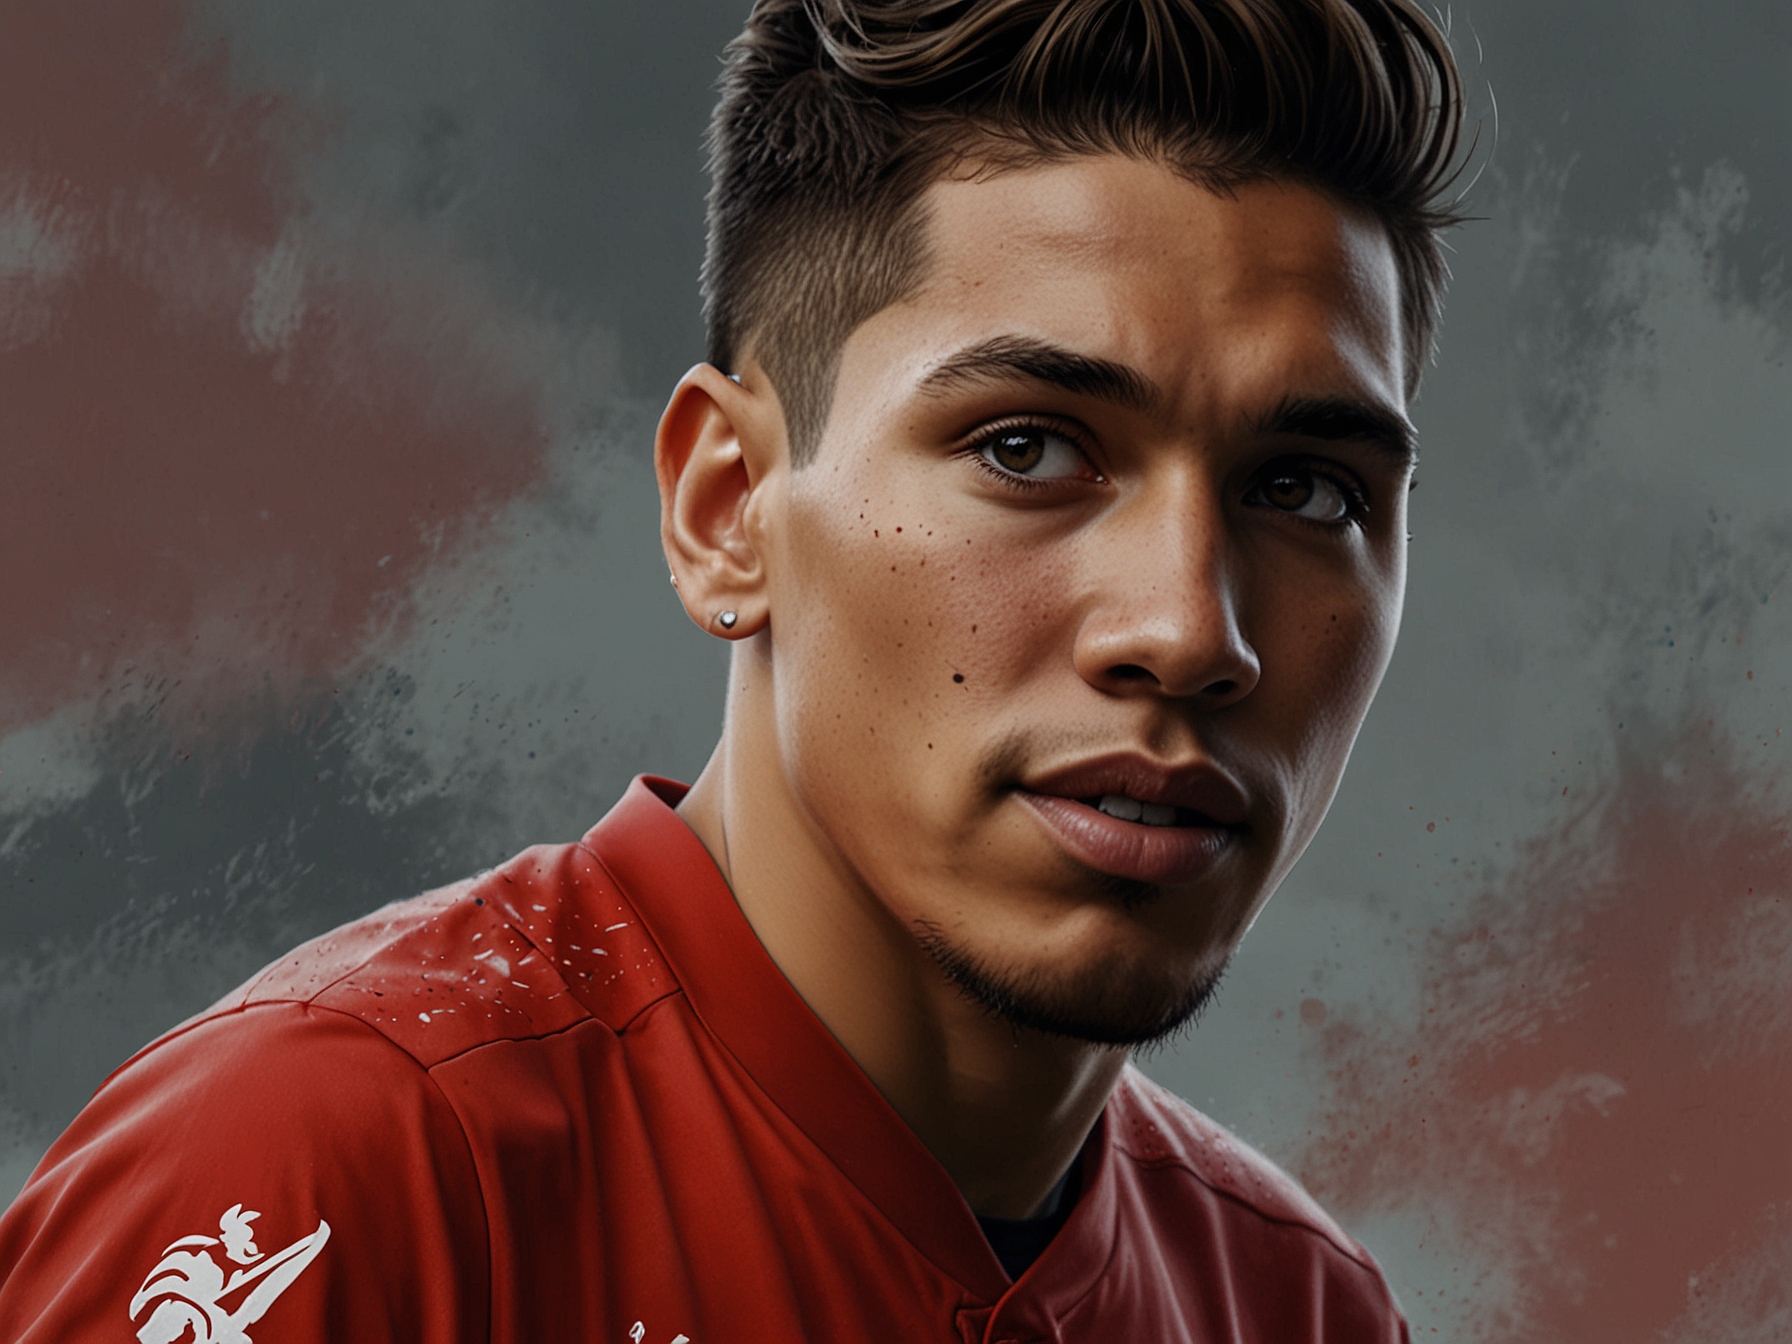 A close-up of Firmino in the new club's attire, emphasizing the bewilderment and discussion it sparked within the football community, remaining uncertain among eagle-eyed fans.